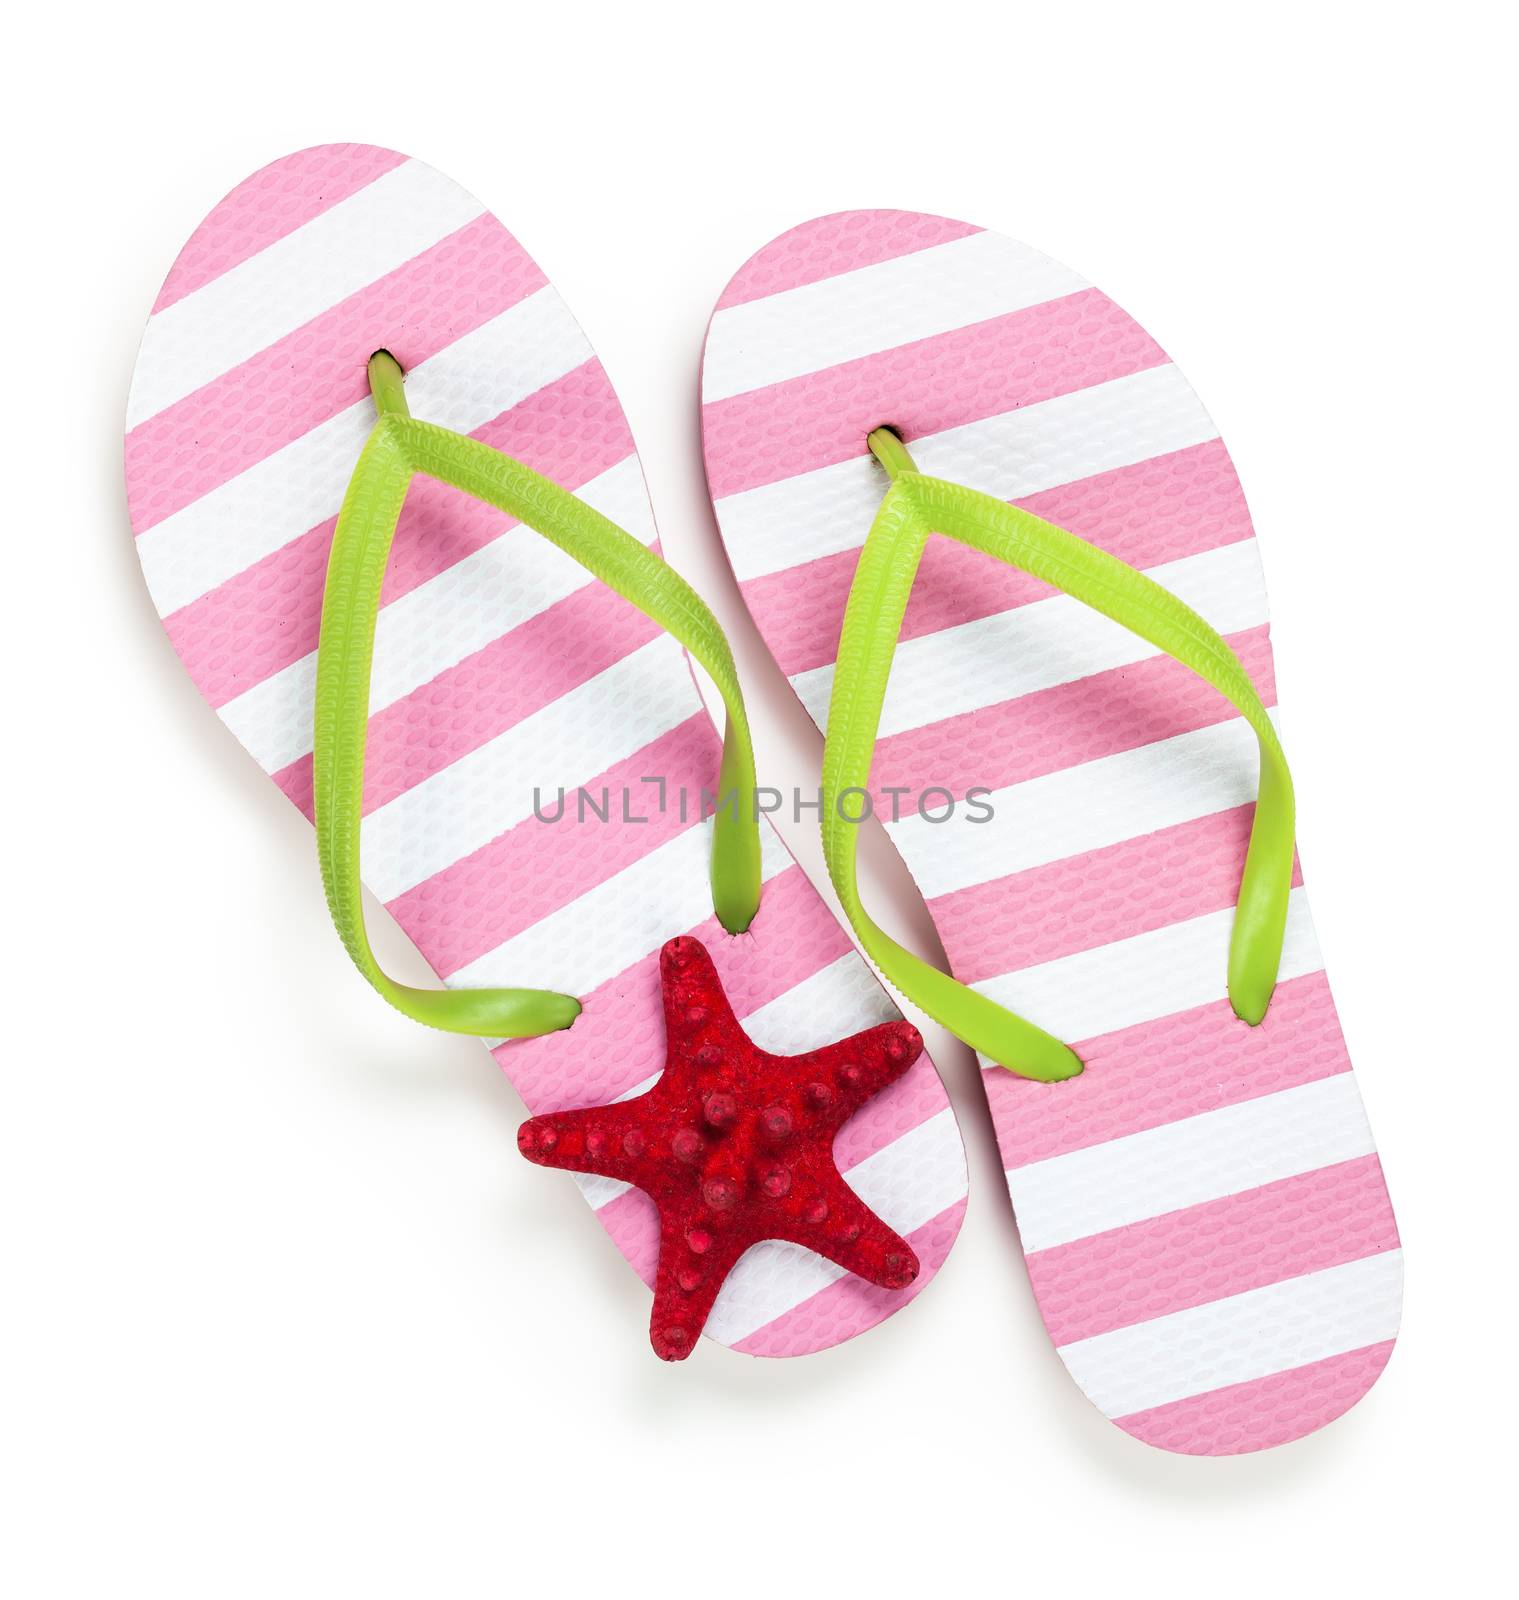 Summer flip flops with starfish on white background. Top view 